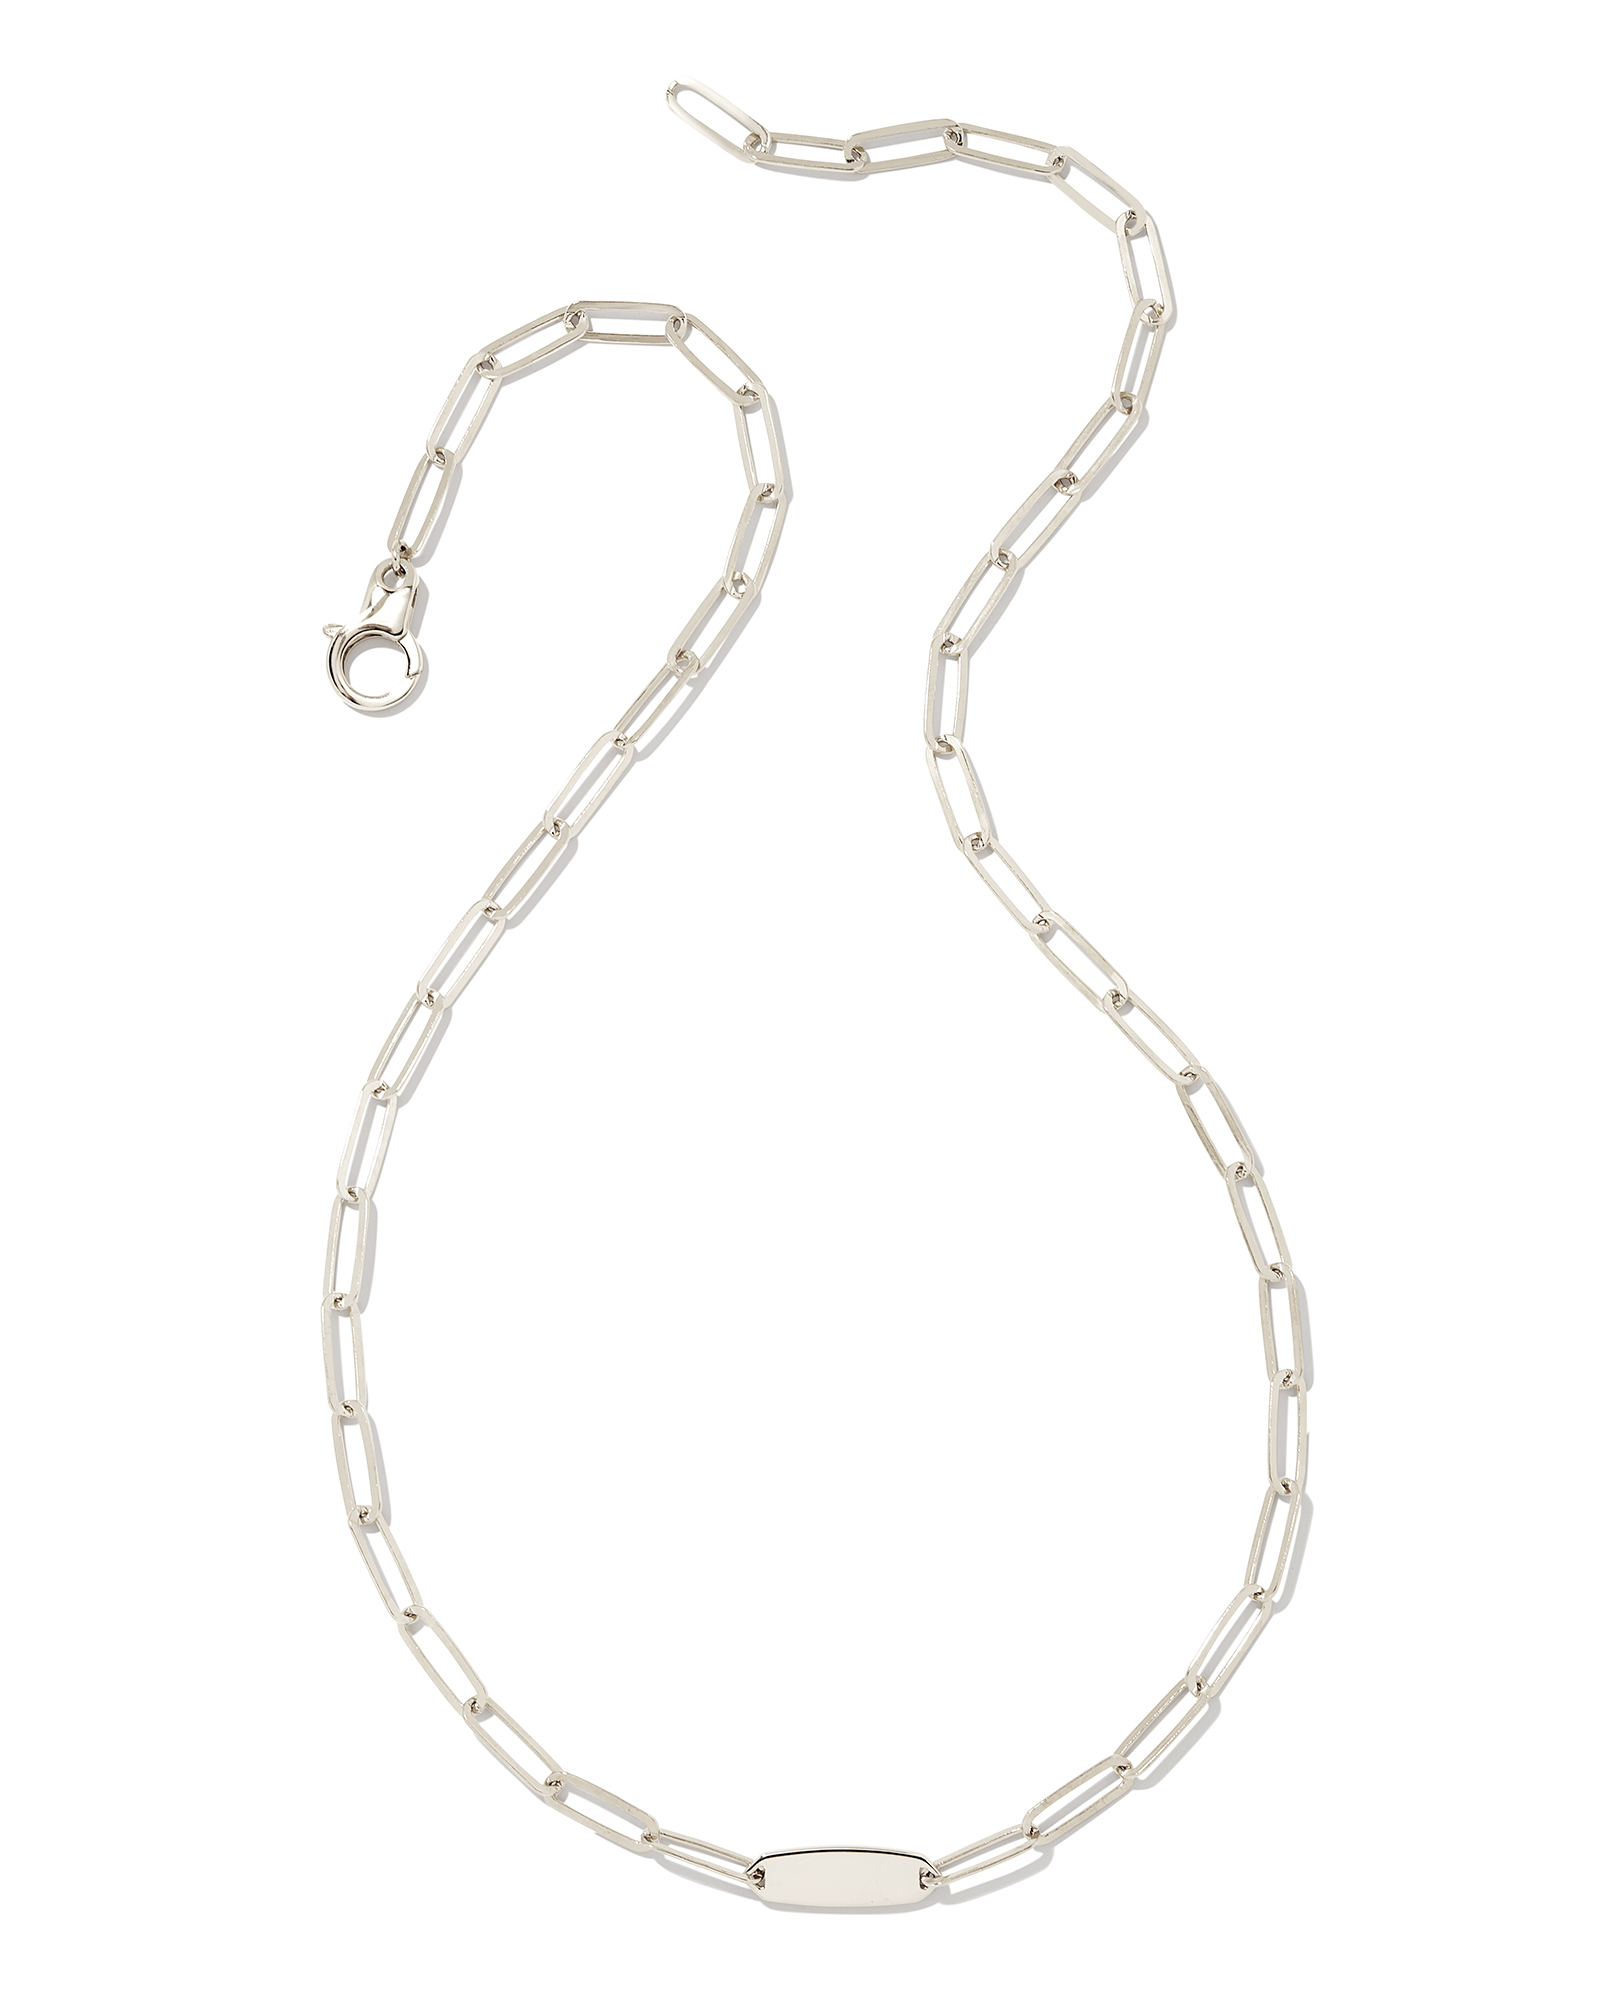 Marlee Paperclip Chain Necklace in Sterling Silver | Kendra Scott